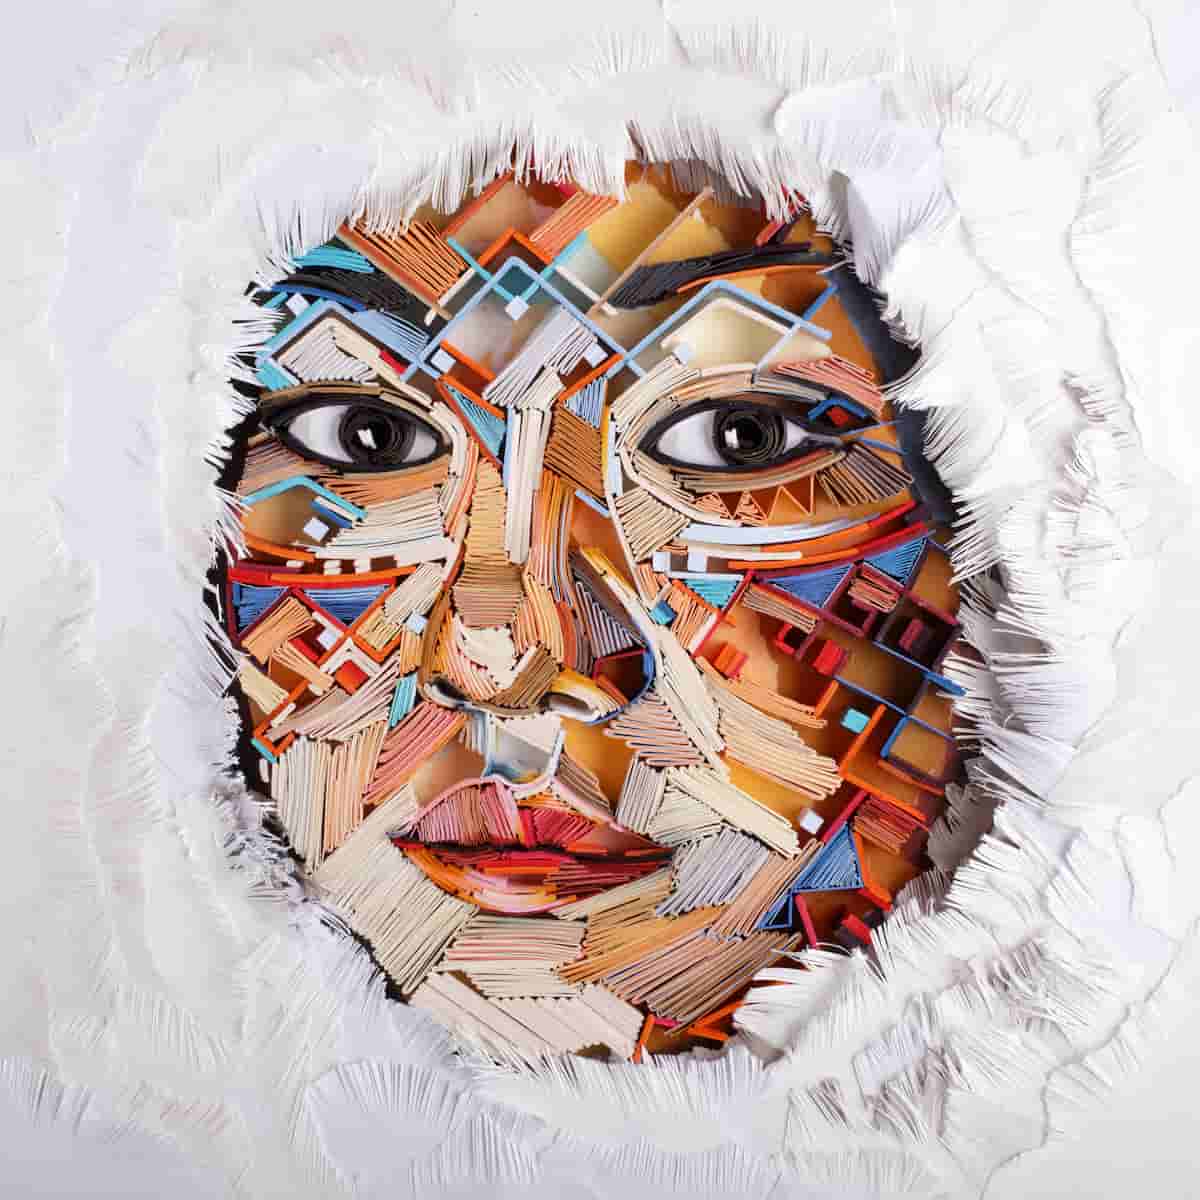 In Meticulous Paper Portraits, Yulia Brodskaya Coaxes Visions of a Compassionate Future